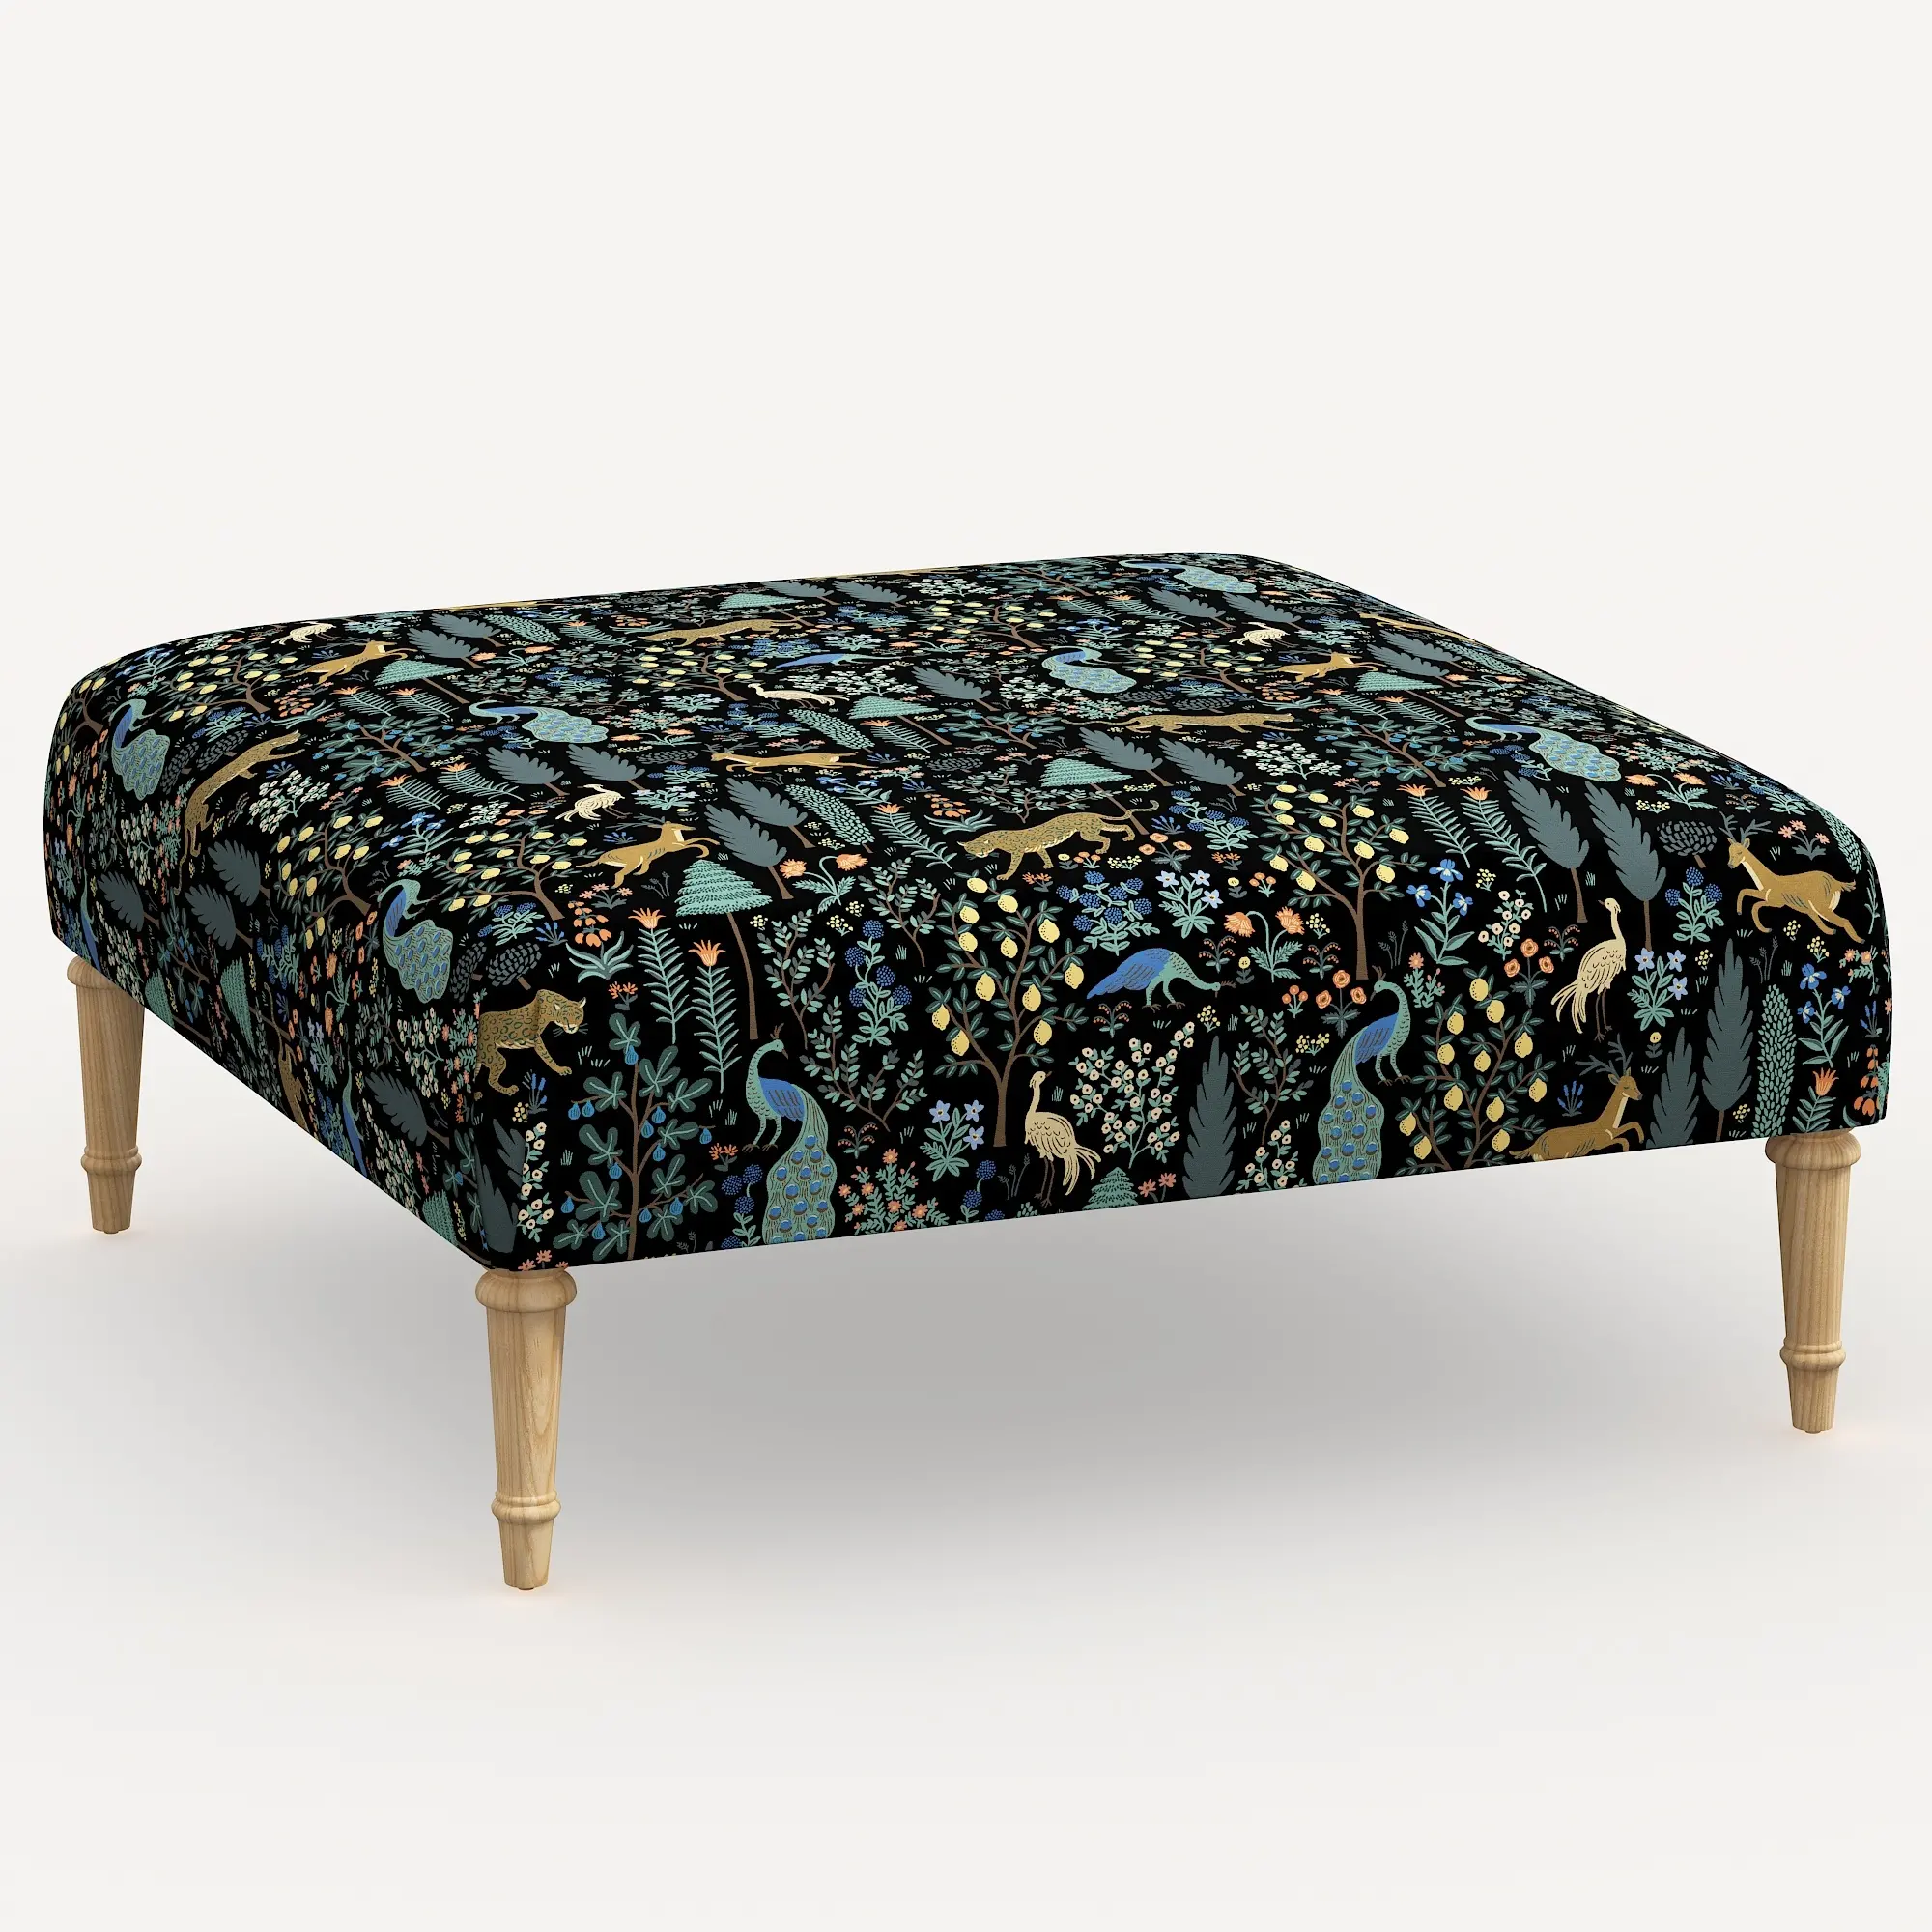 Rifle Paper Co. Greenwich Menagerie Black Ottoman with Natural Legs